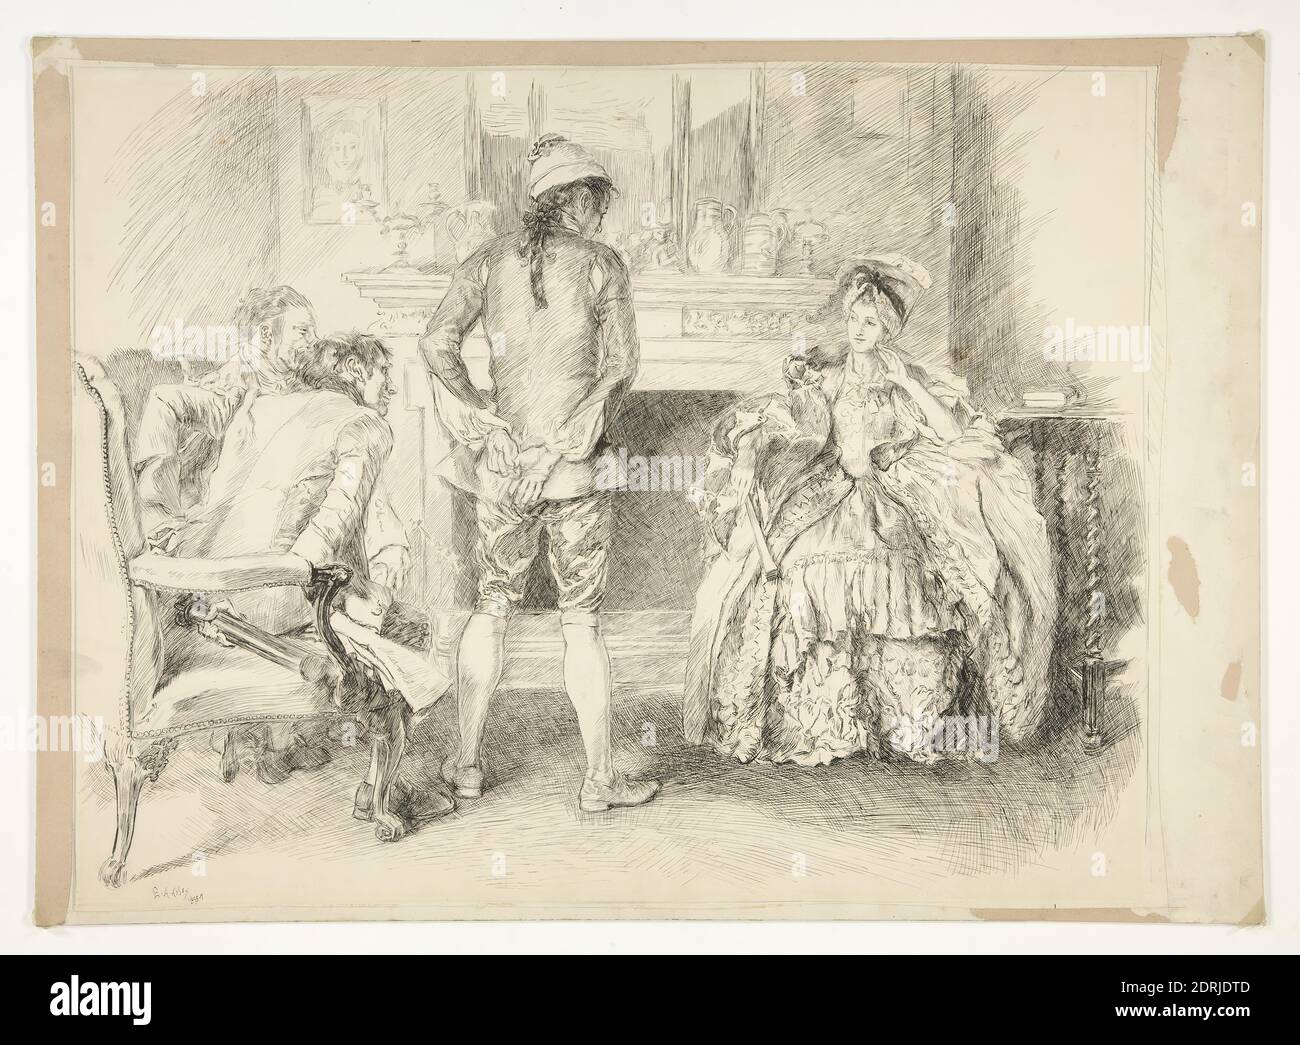 Artist: Edwin Austin Abbey, American, 1852–1911, M.A., 1897, The Good-natured Man.  Miss Richland and the Bailiff, Pen and ink, 63.3 × 50 cm (24 15/16 × 19 11/16 in. ) (sight), Made in United States, American, 19th century, Works on Paper - Drawings and Watercolors Stock Photo